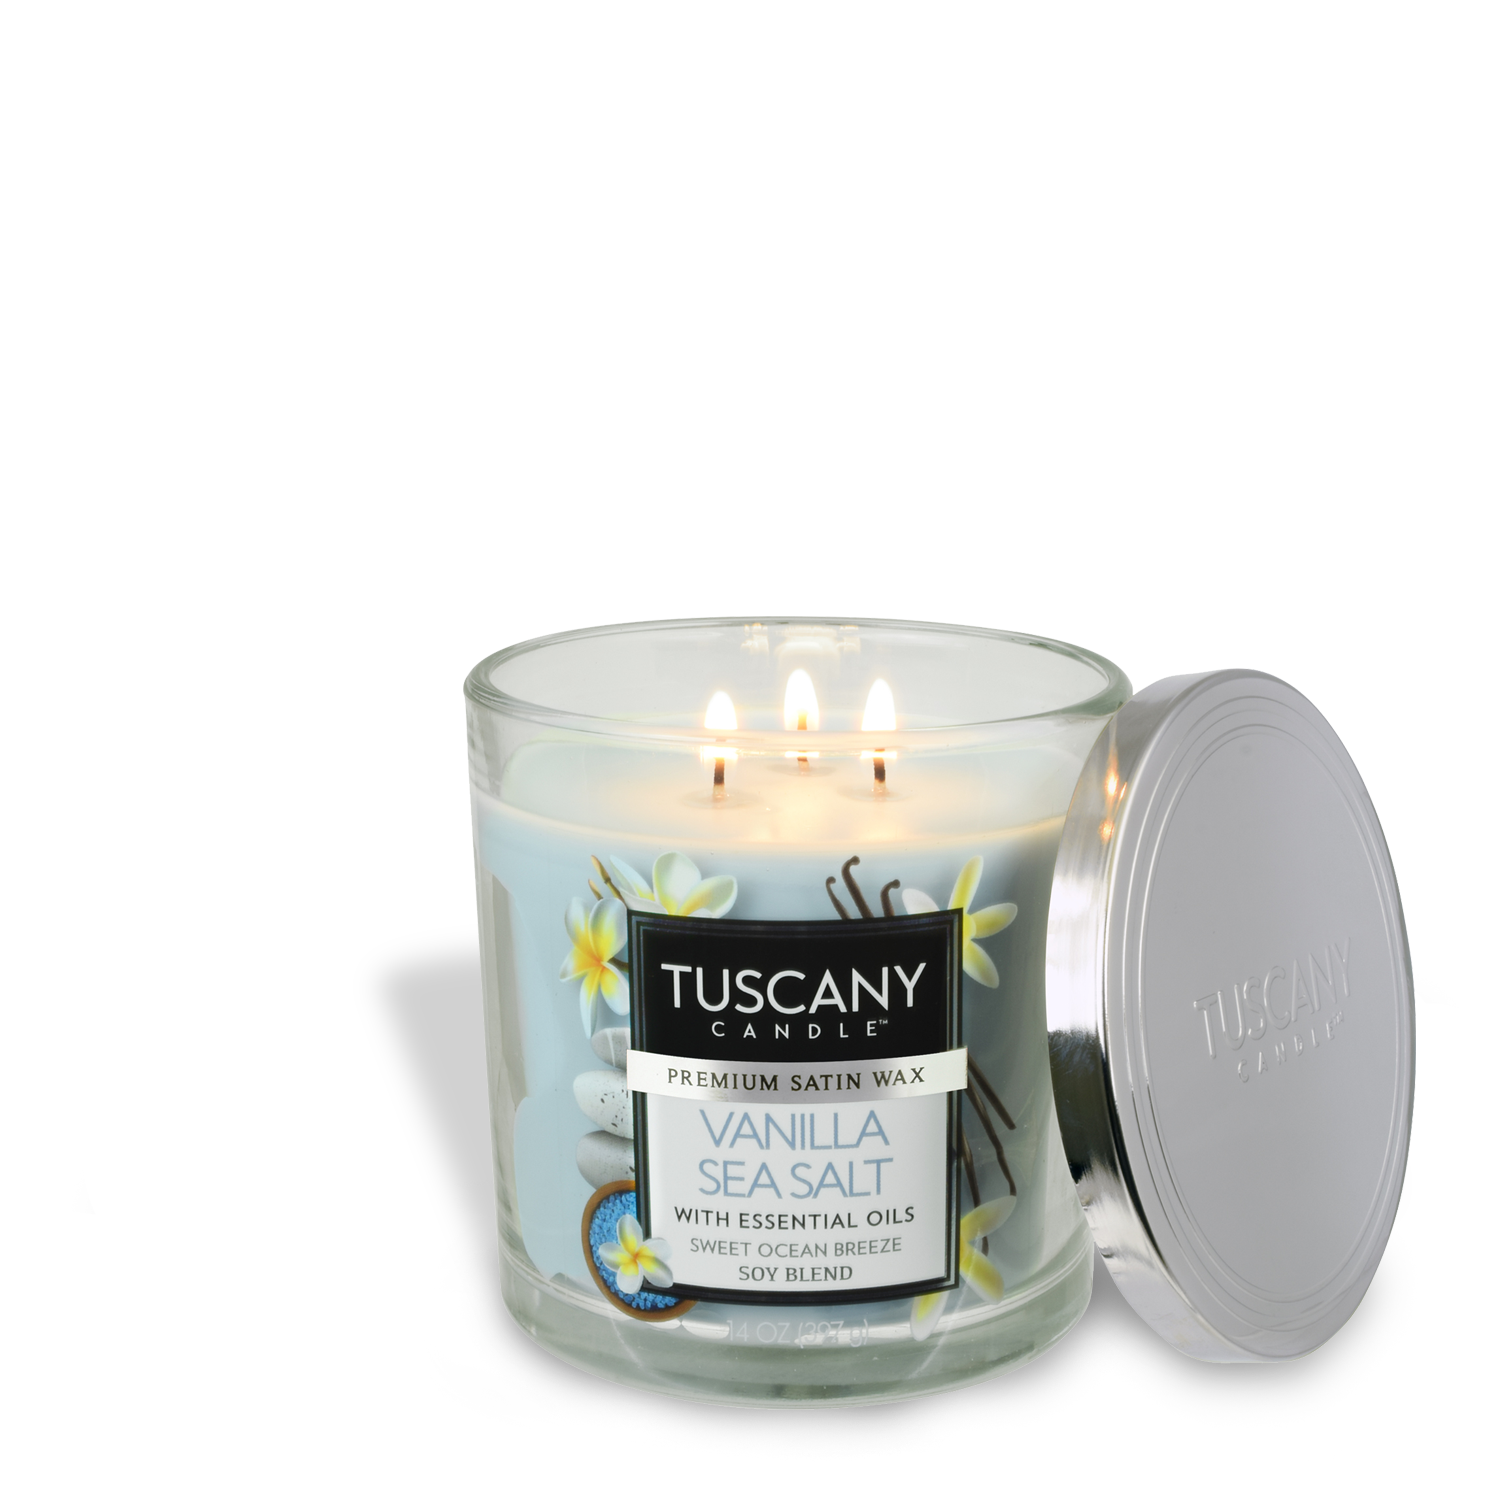 Scented with Vanilla Sea Salt fragrance and made with essential oils for a clean burn by Tuscany Candle® EVD.